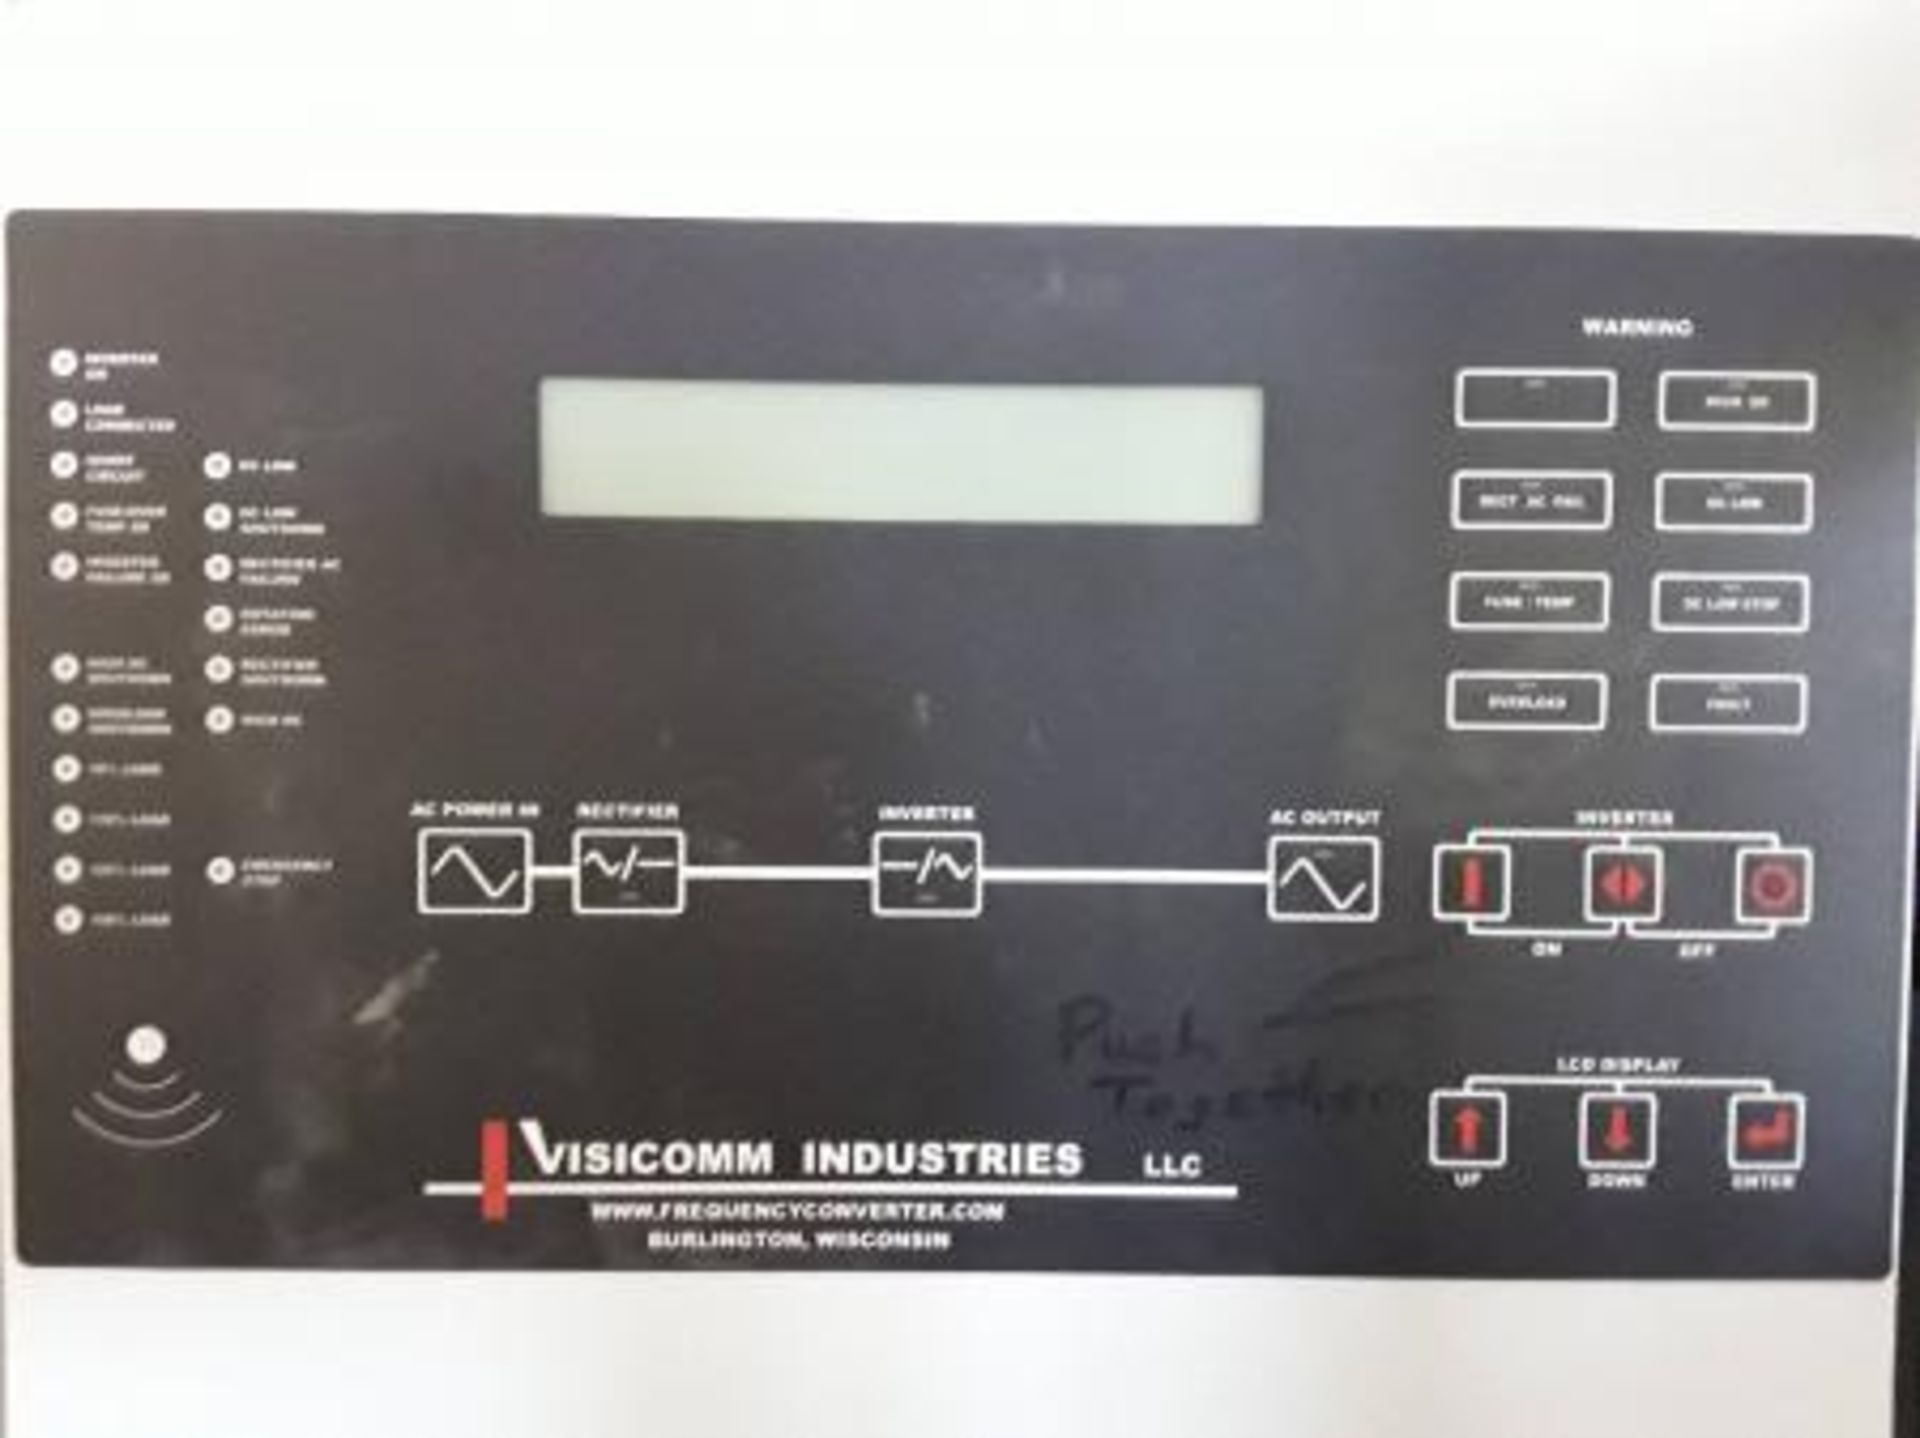 Visicomm Industries Frquency Converter - Image 2 of 10